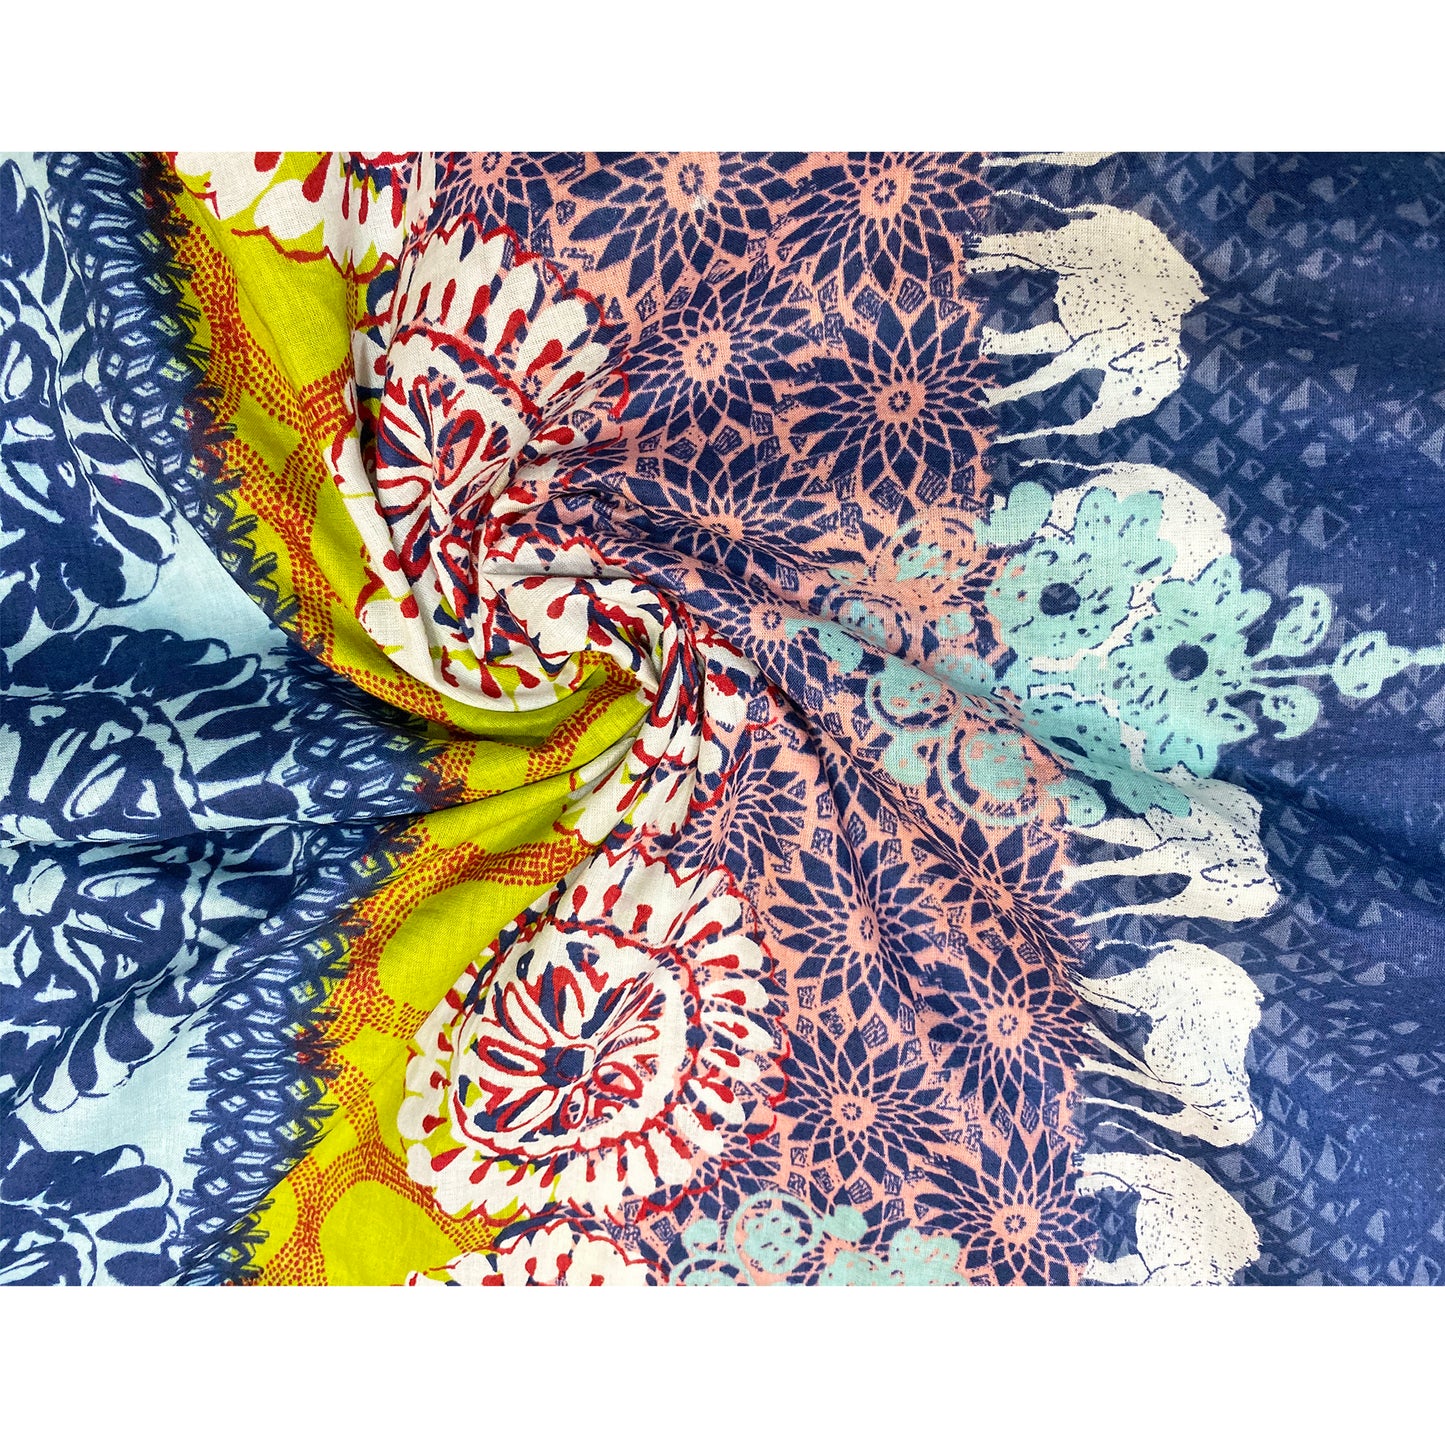 Printed Cotton Fabric With Elephant Border